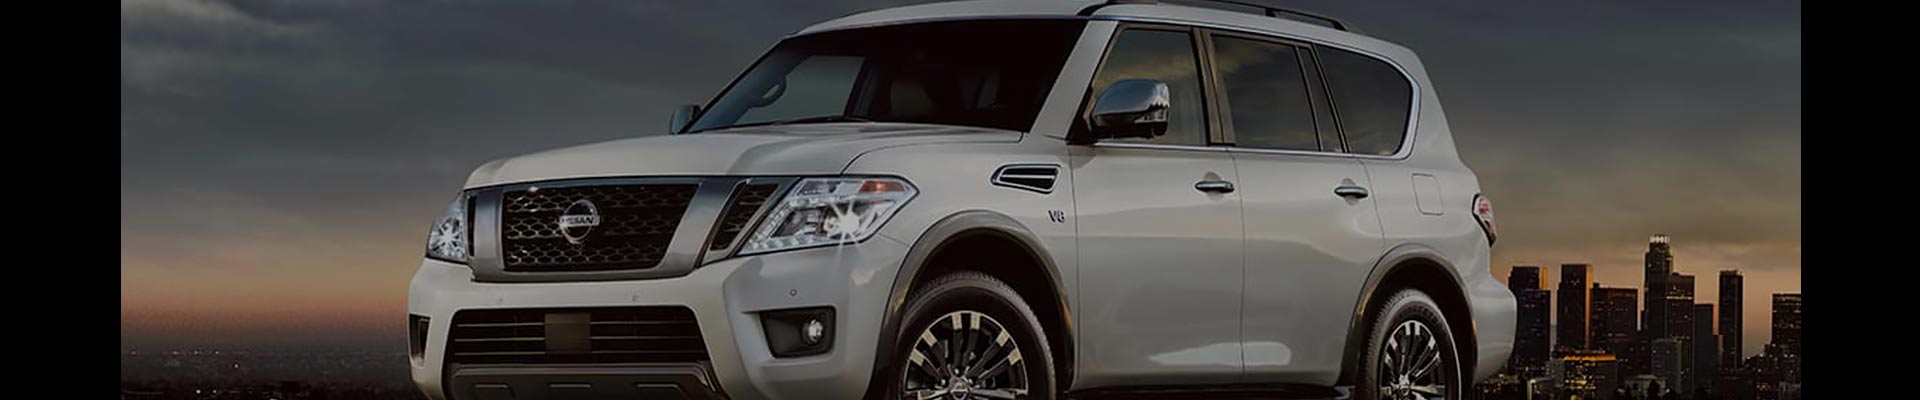 Shop Replacement and OEM Nissan Armada Parts with Discounted Price on the Net